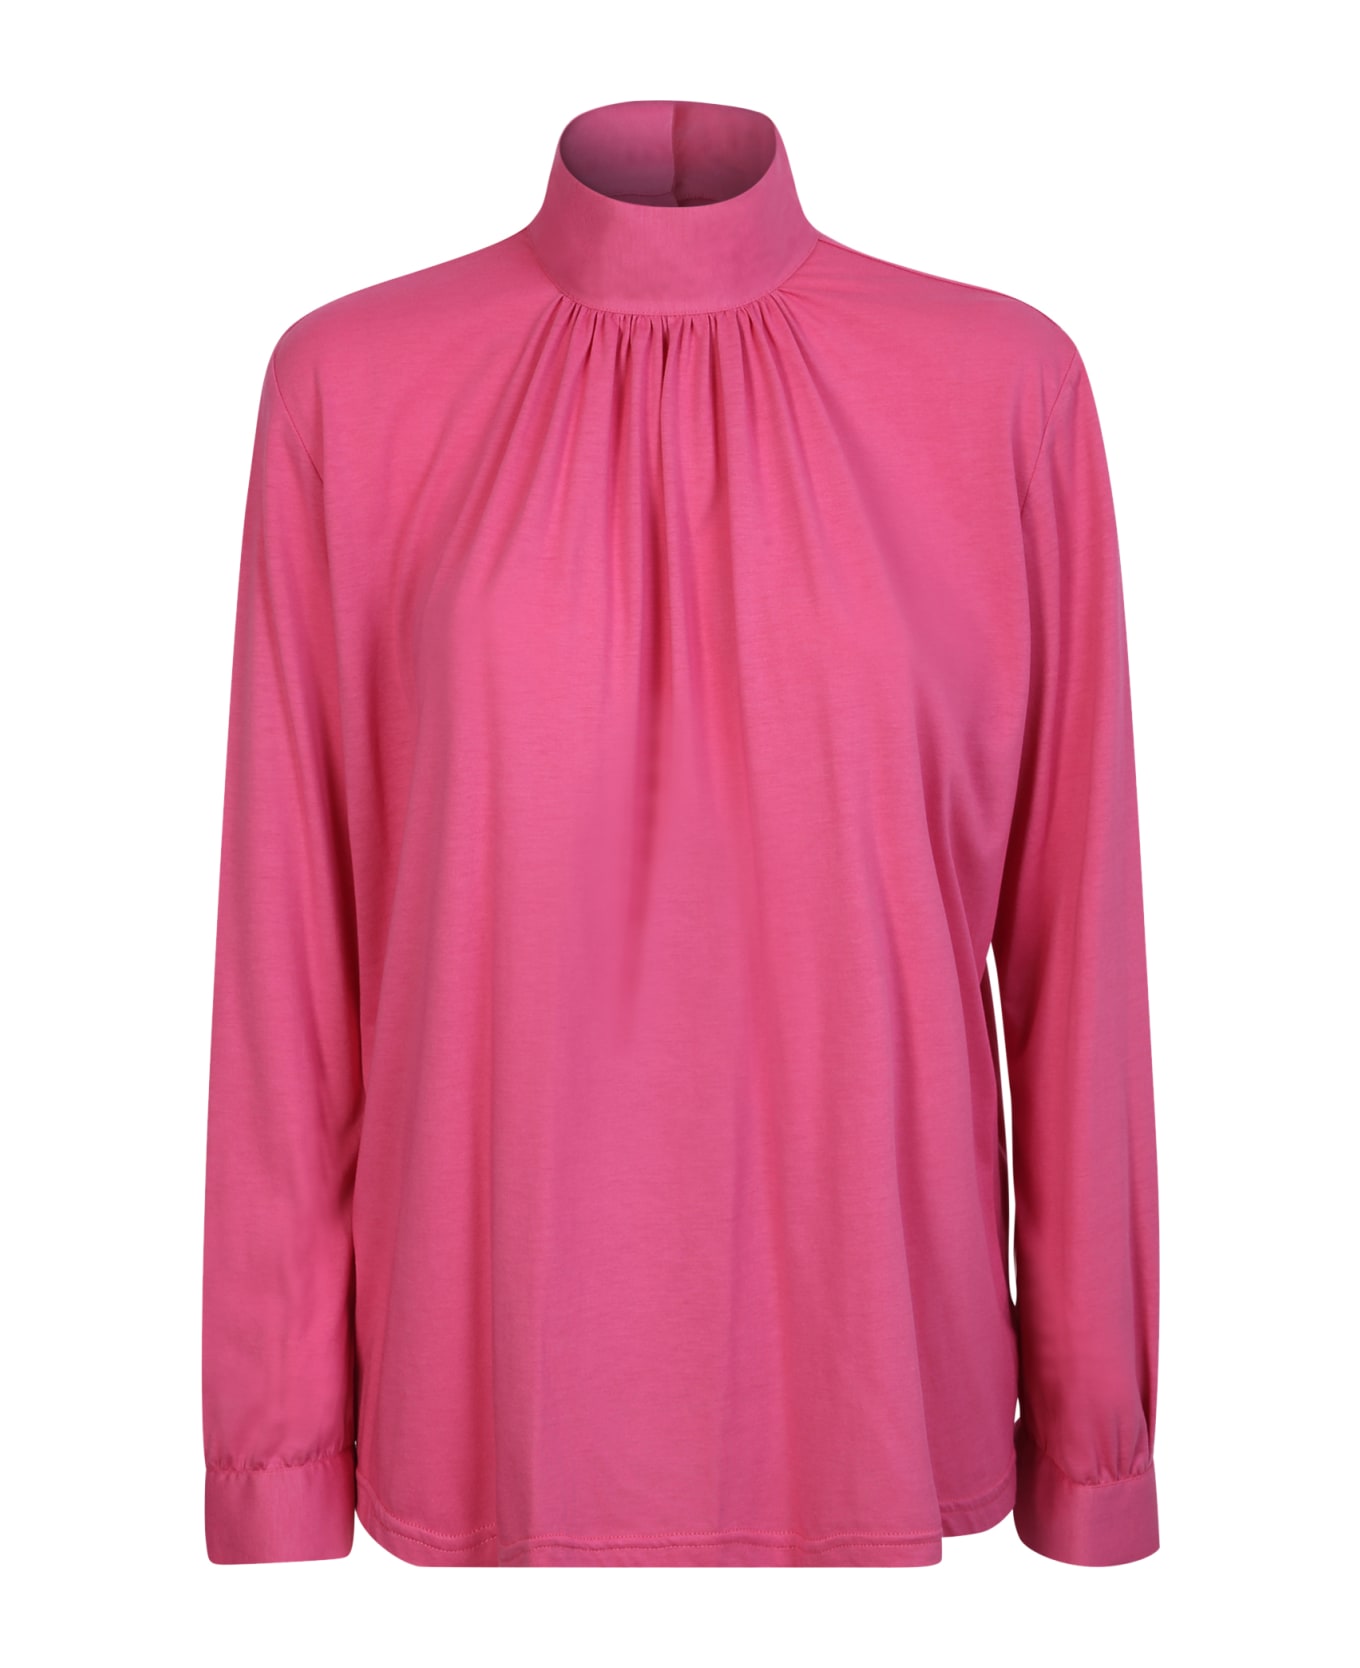 Xacus High Neck Blouse In Pink - Pink